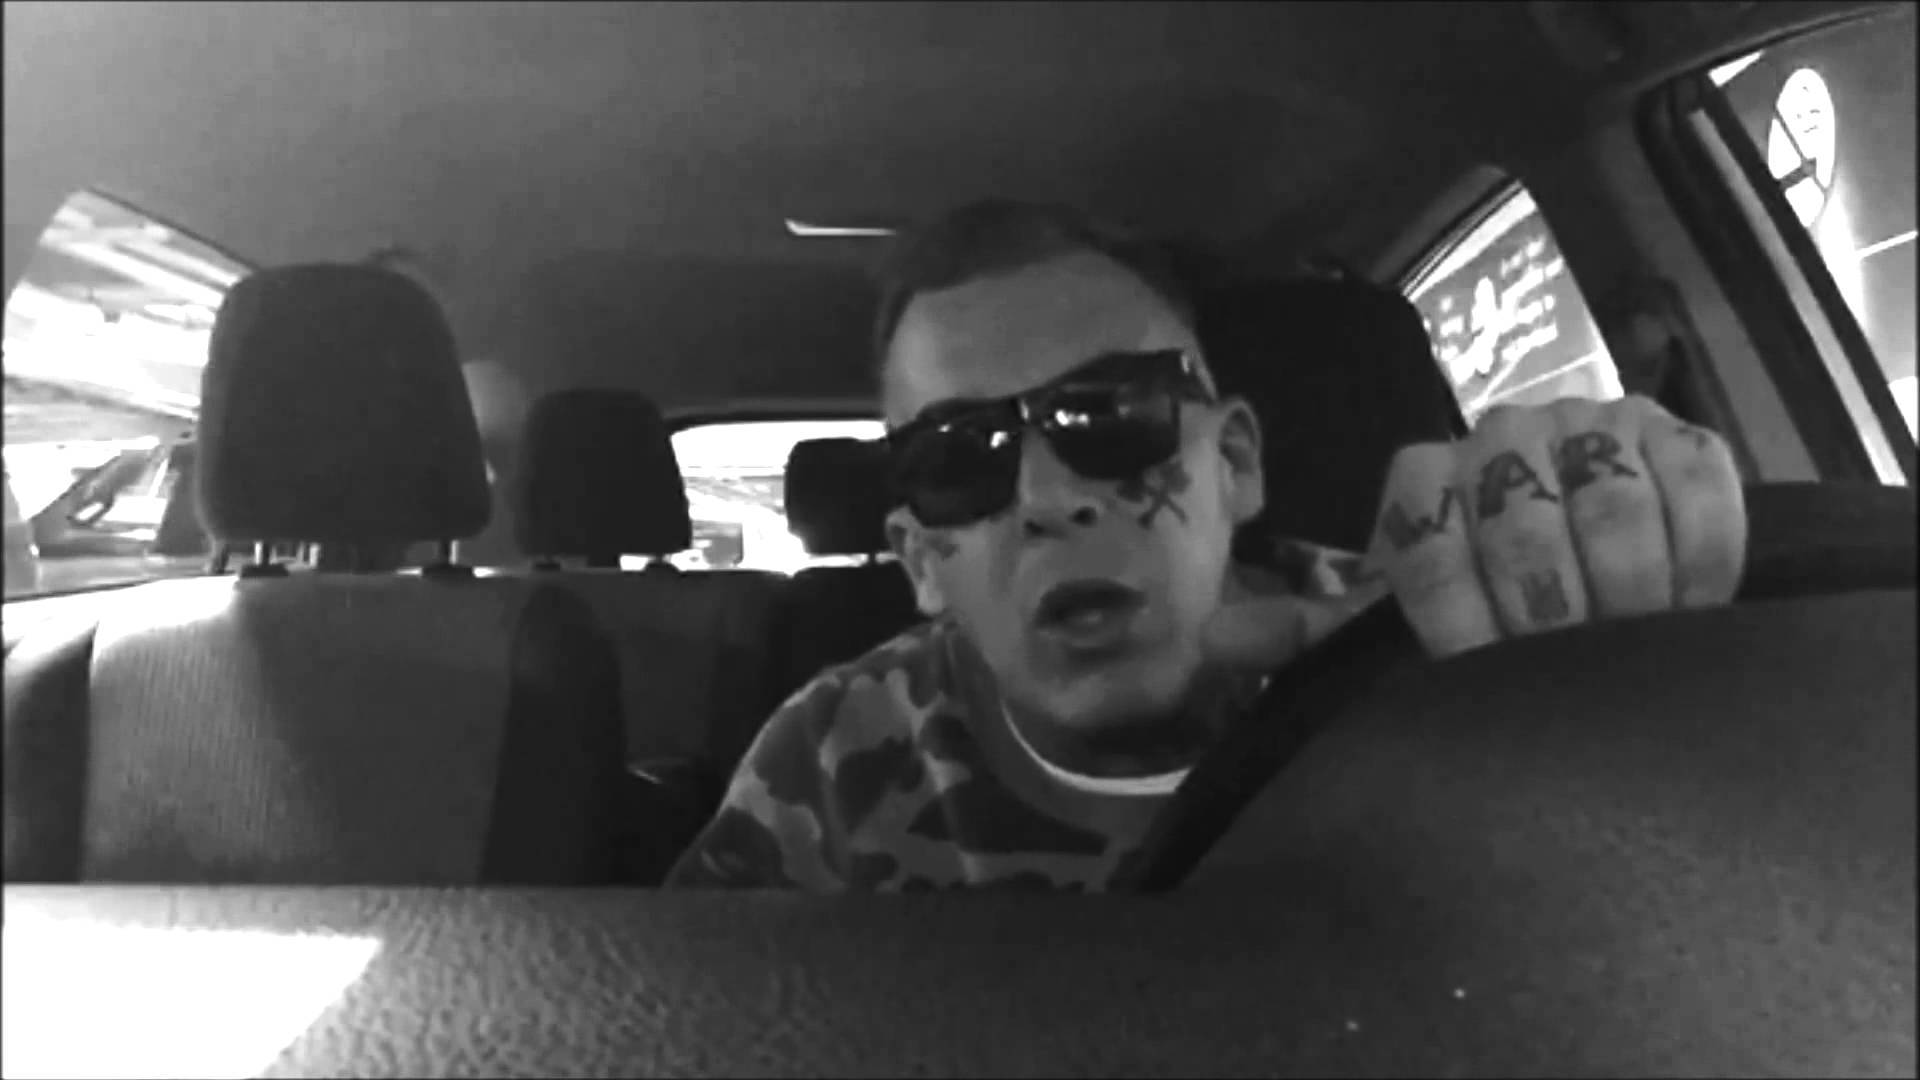 Madchild Drops Music Video To Painful Skies Pop Culture Spin